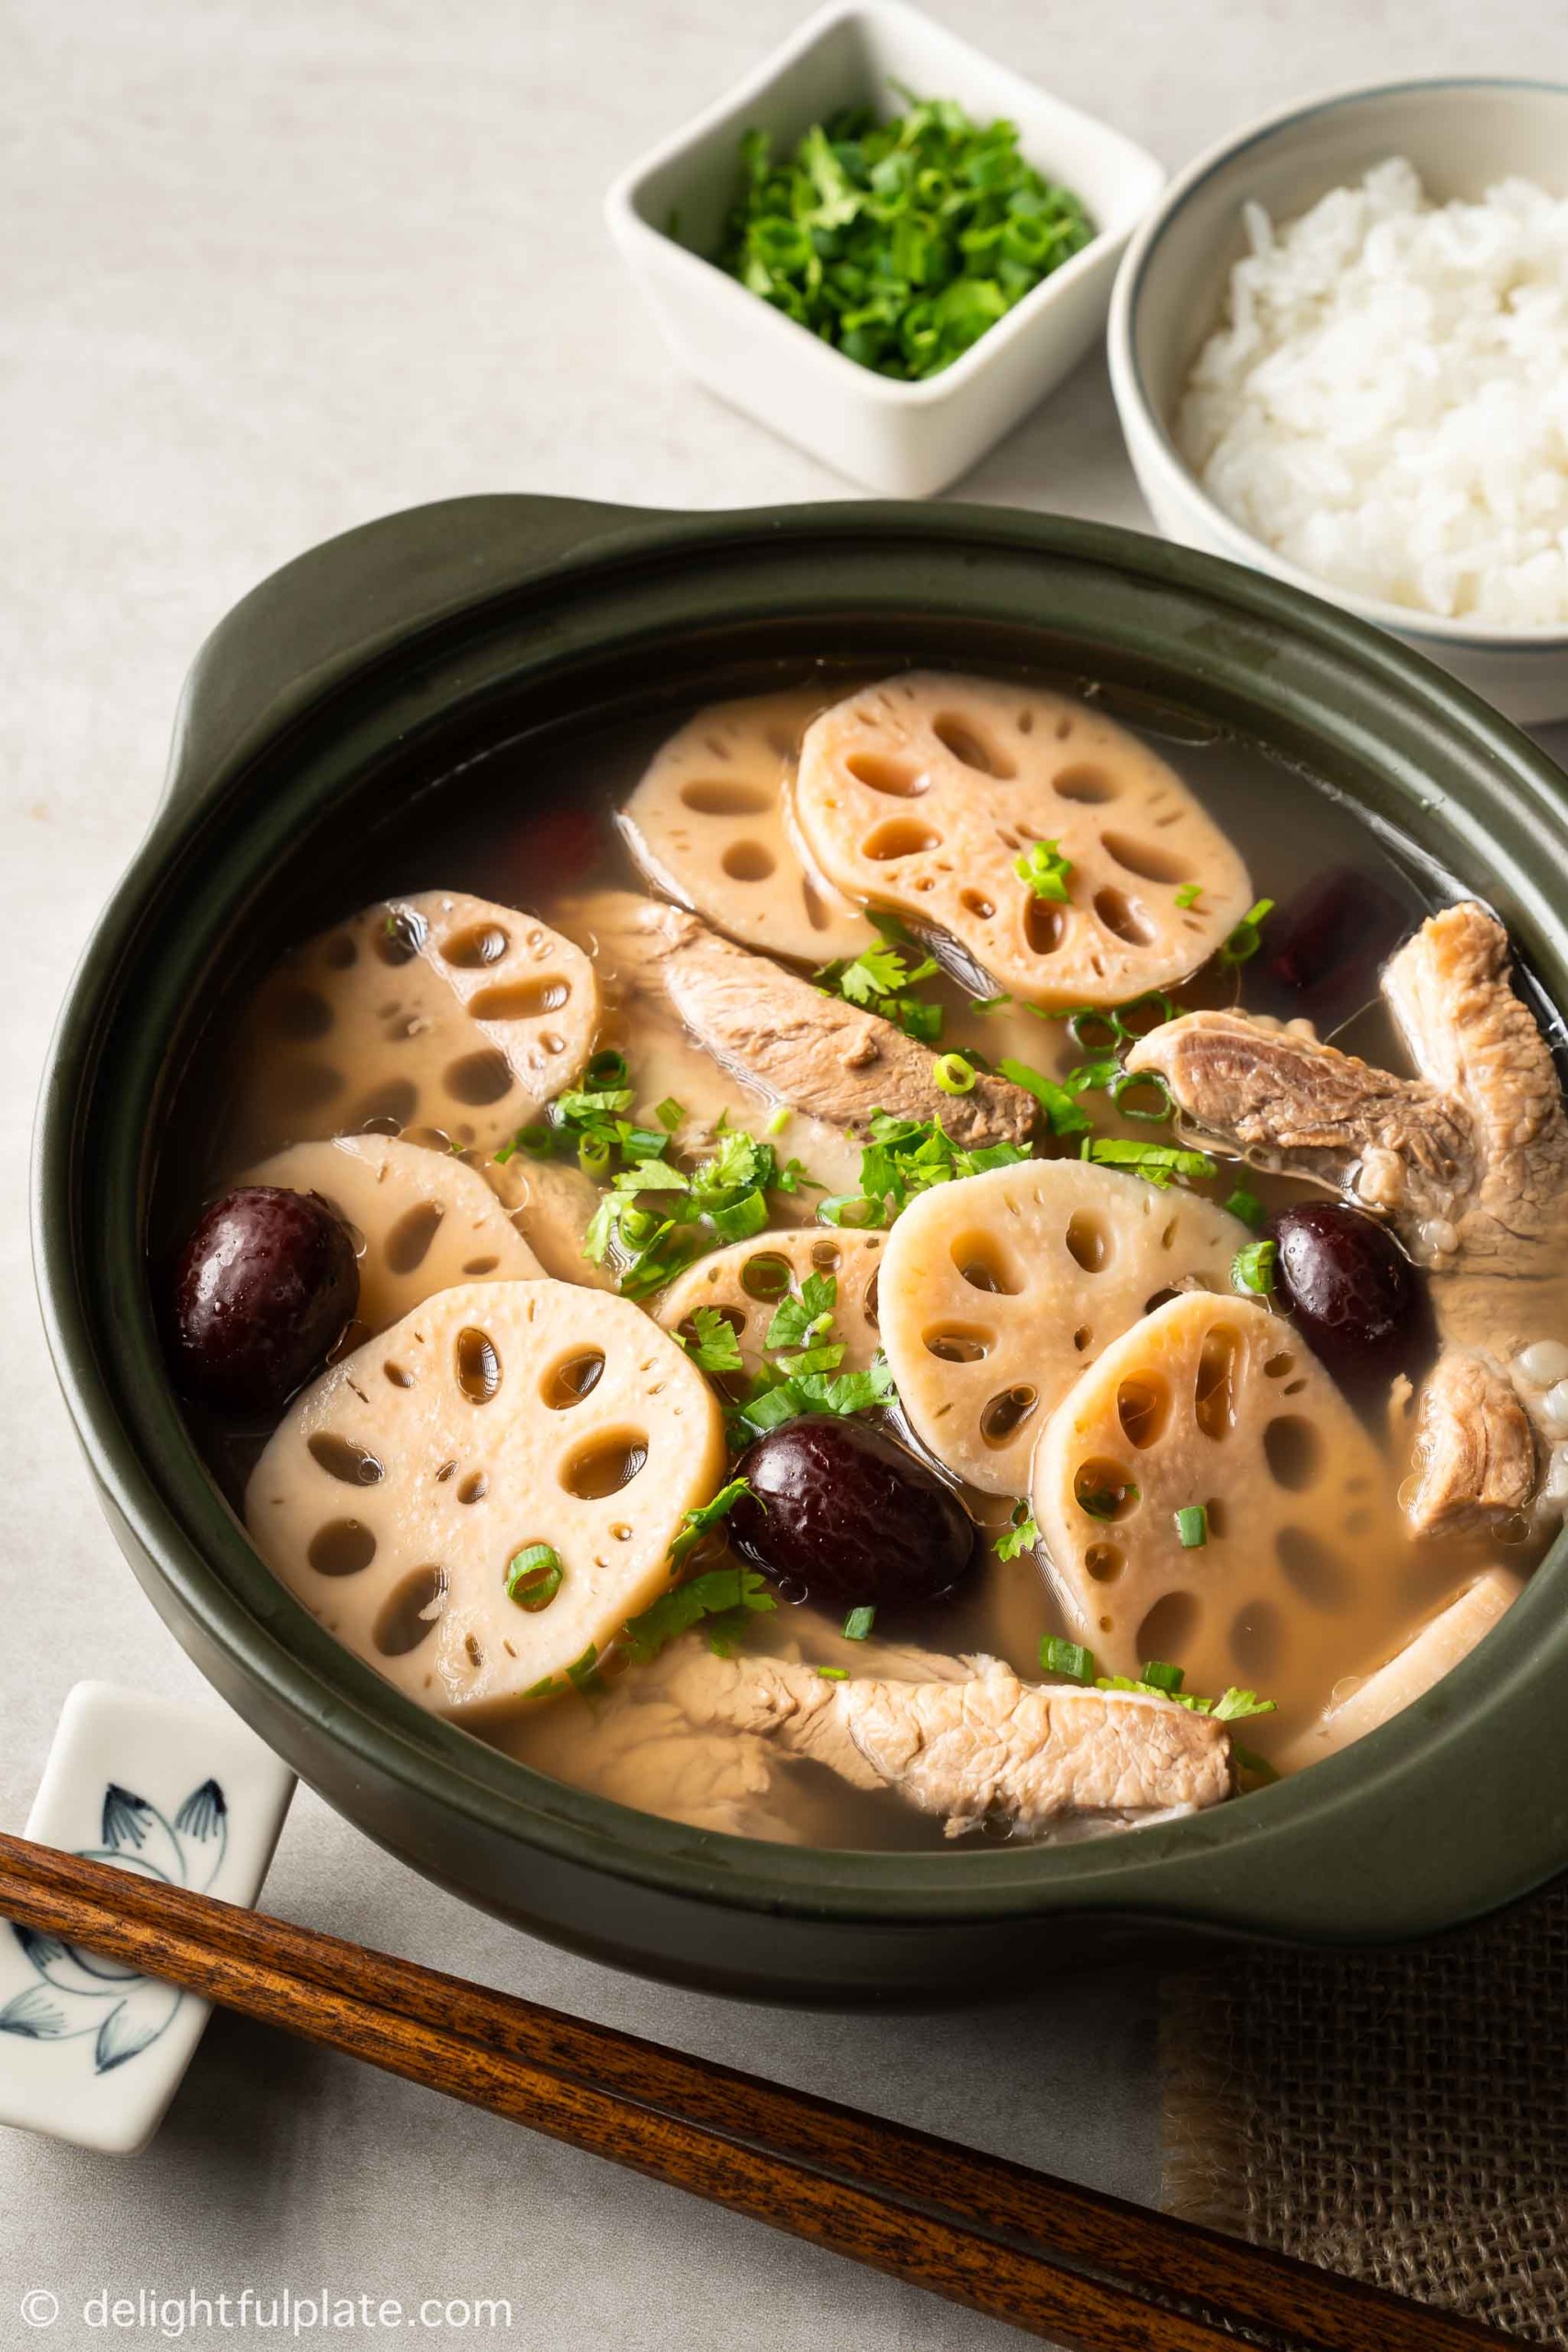 Lotus Root Soup with Pork Ribs